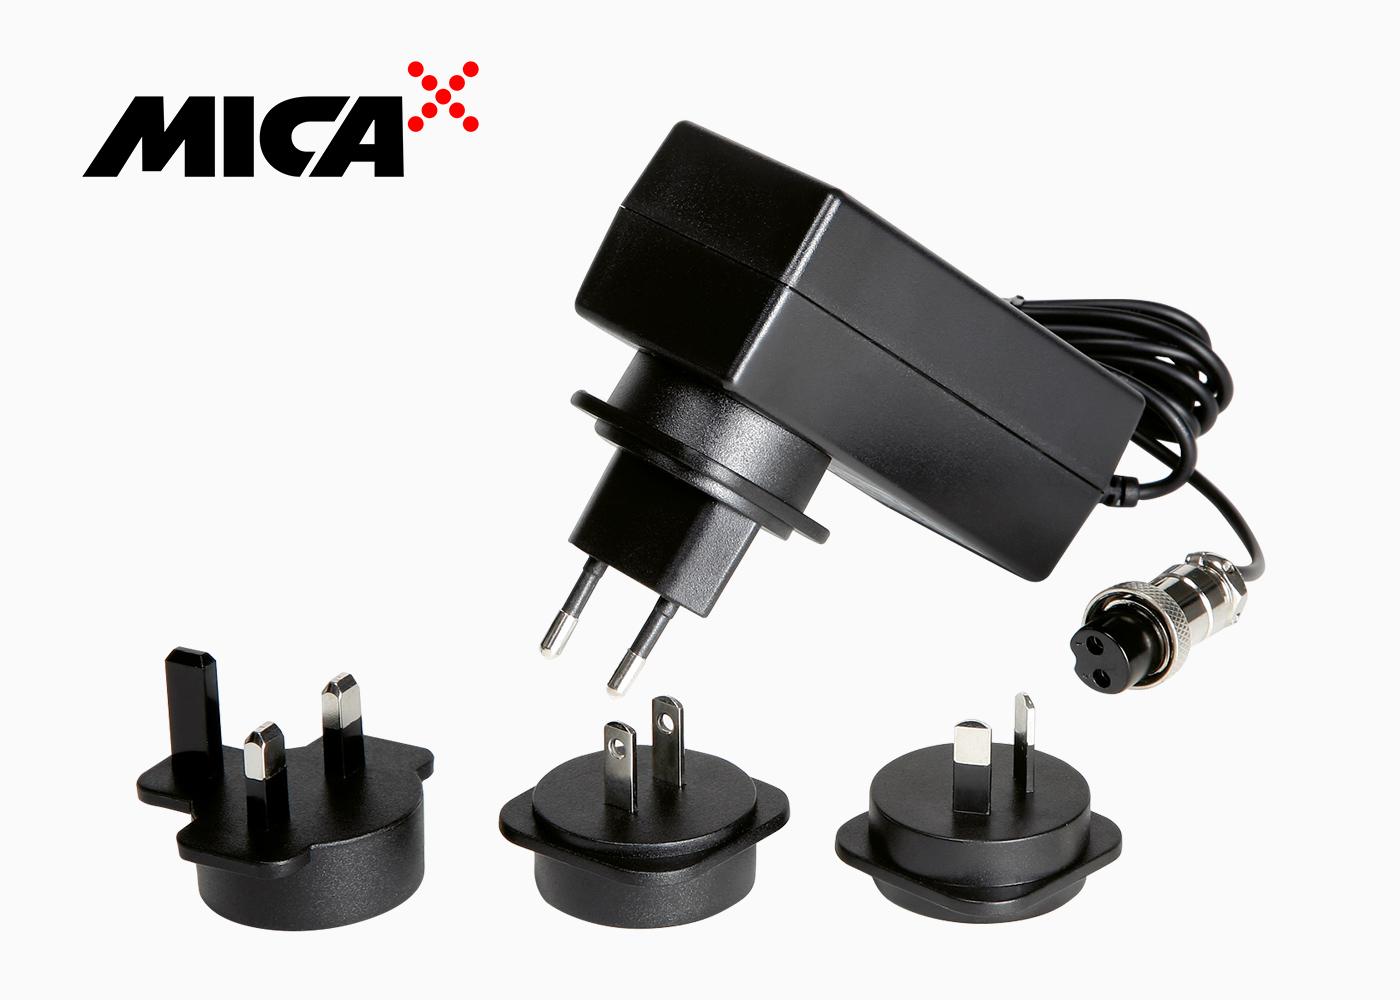 Atexor Mica® Il-2 Mains Adapter